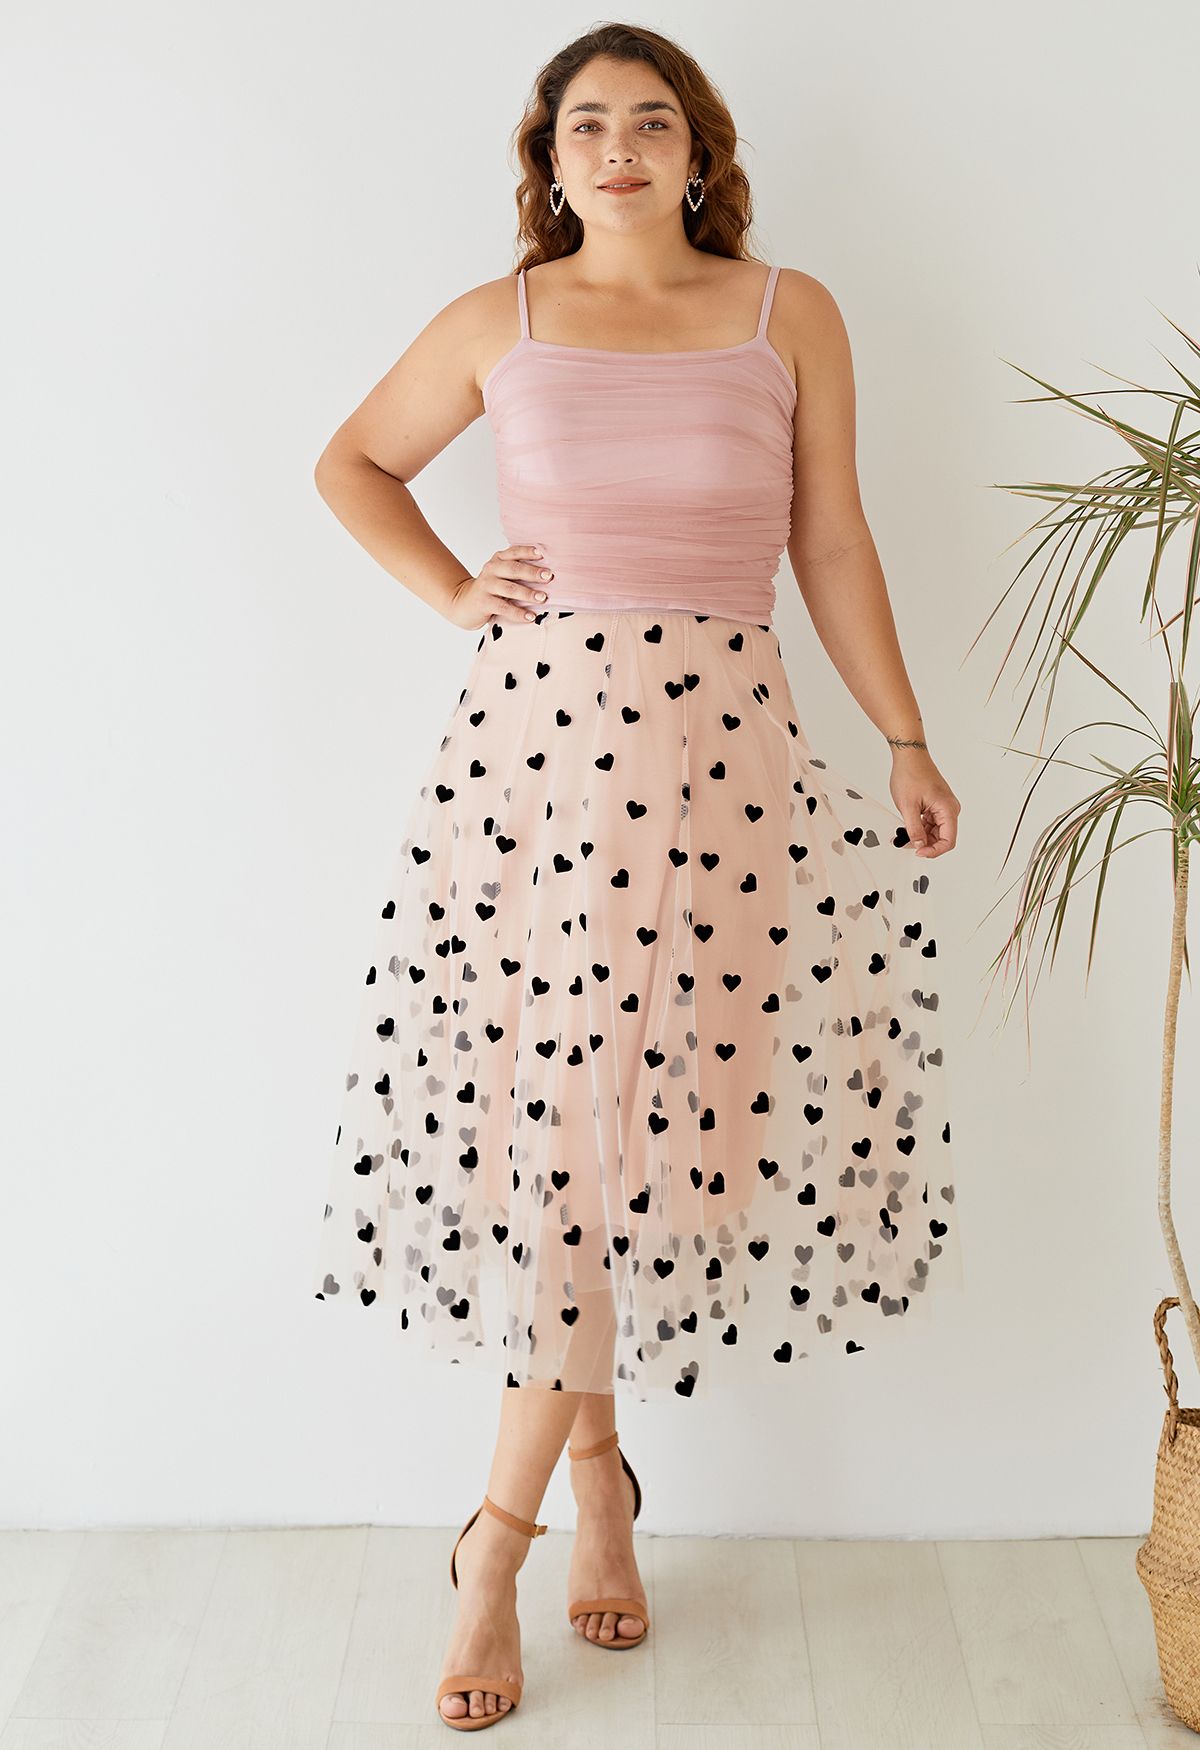 3D Heart Double-Layered Mesh Maxi Skirt in Blush Pink - Retro, Indie and  Unique Fashion